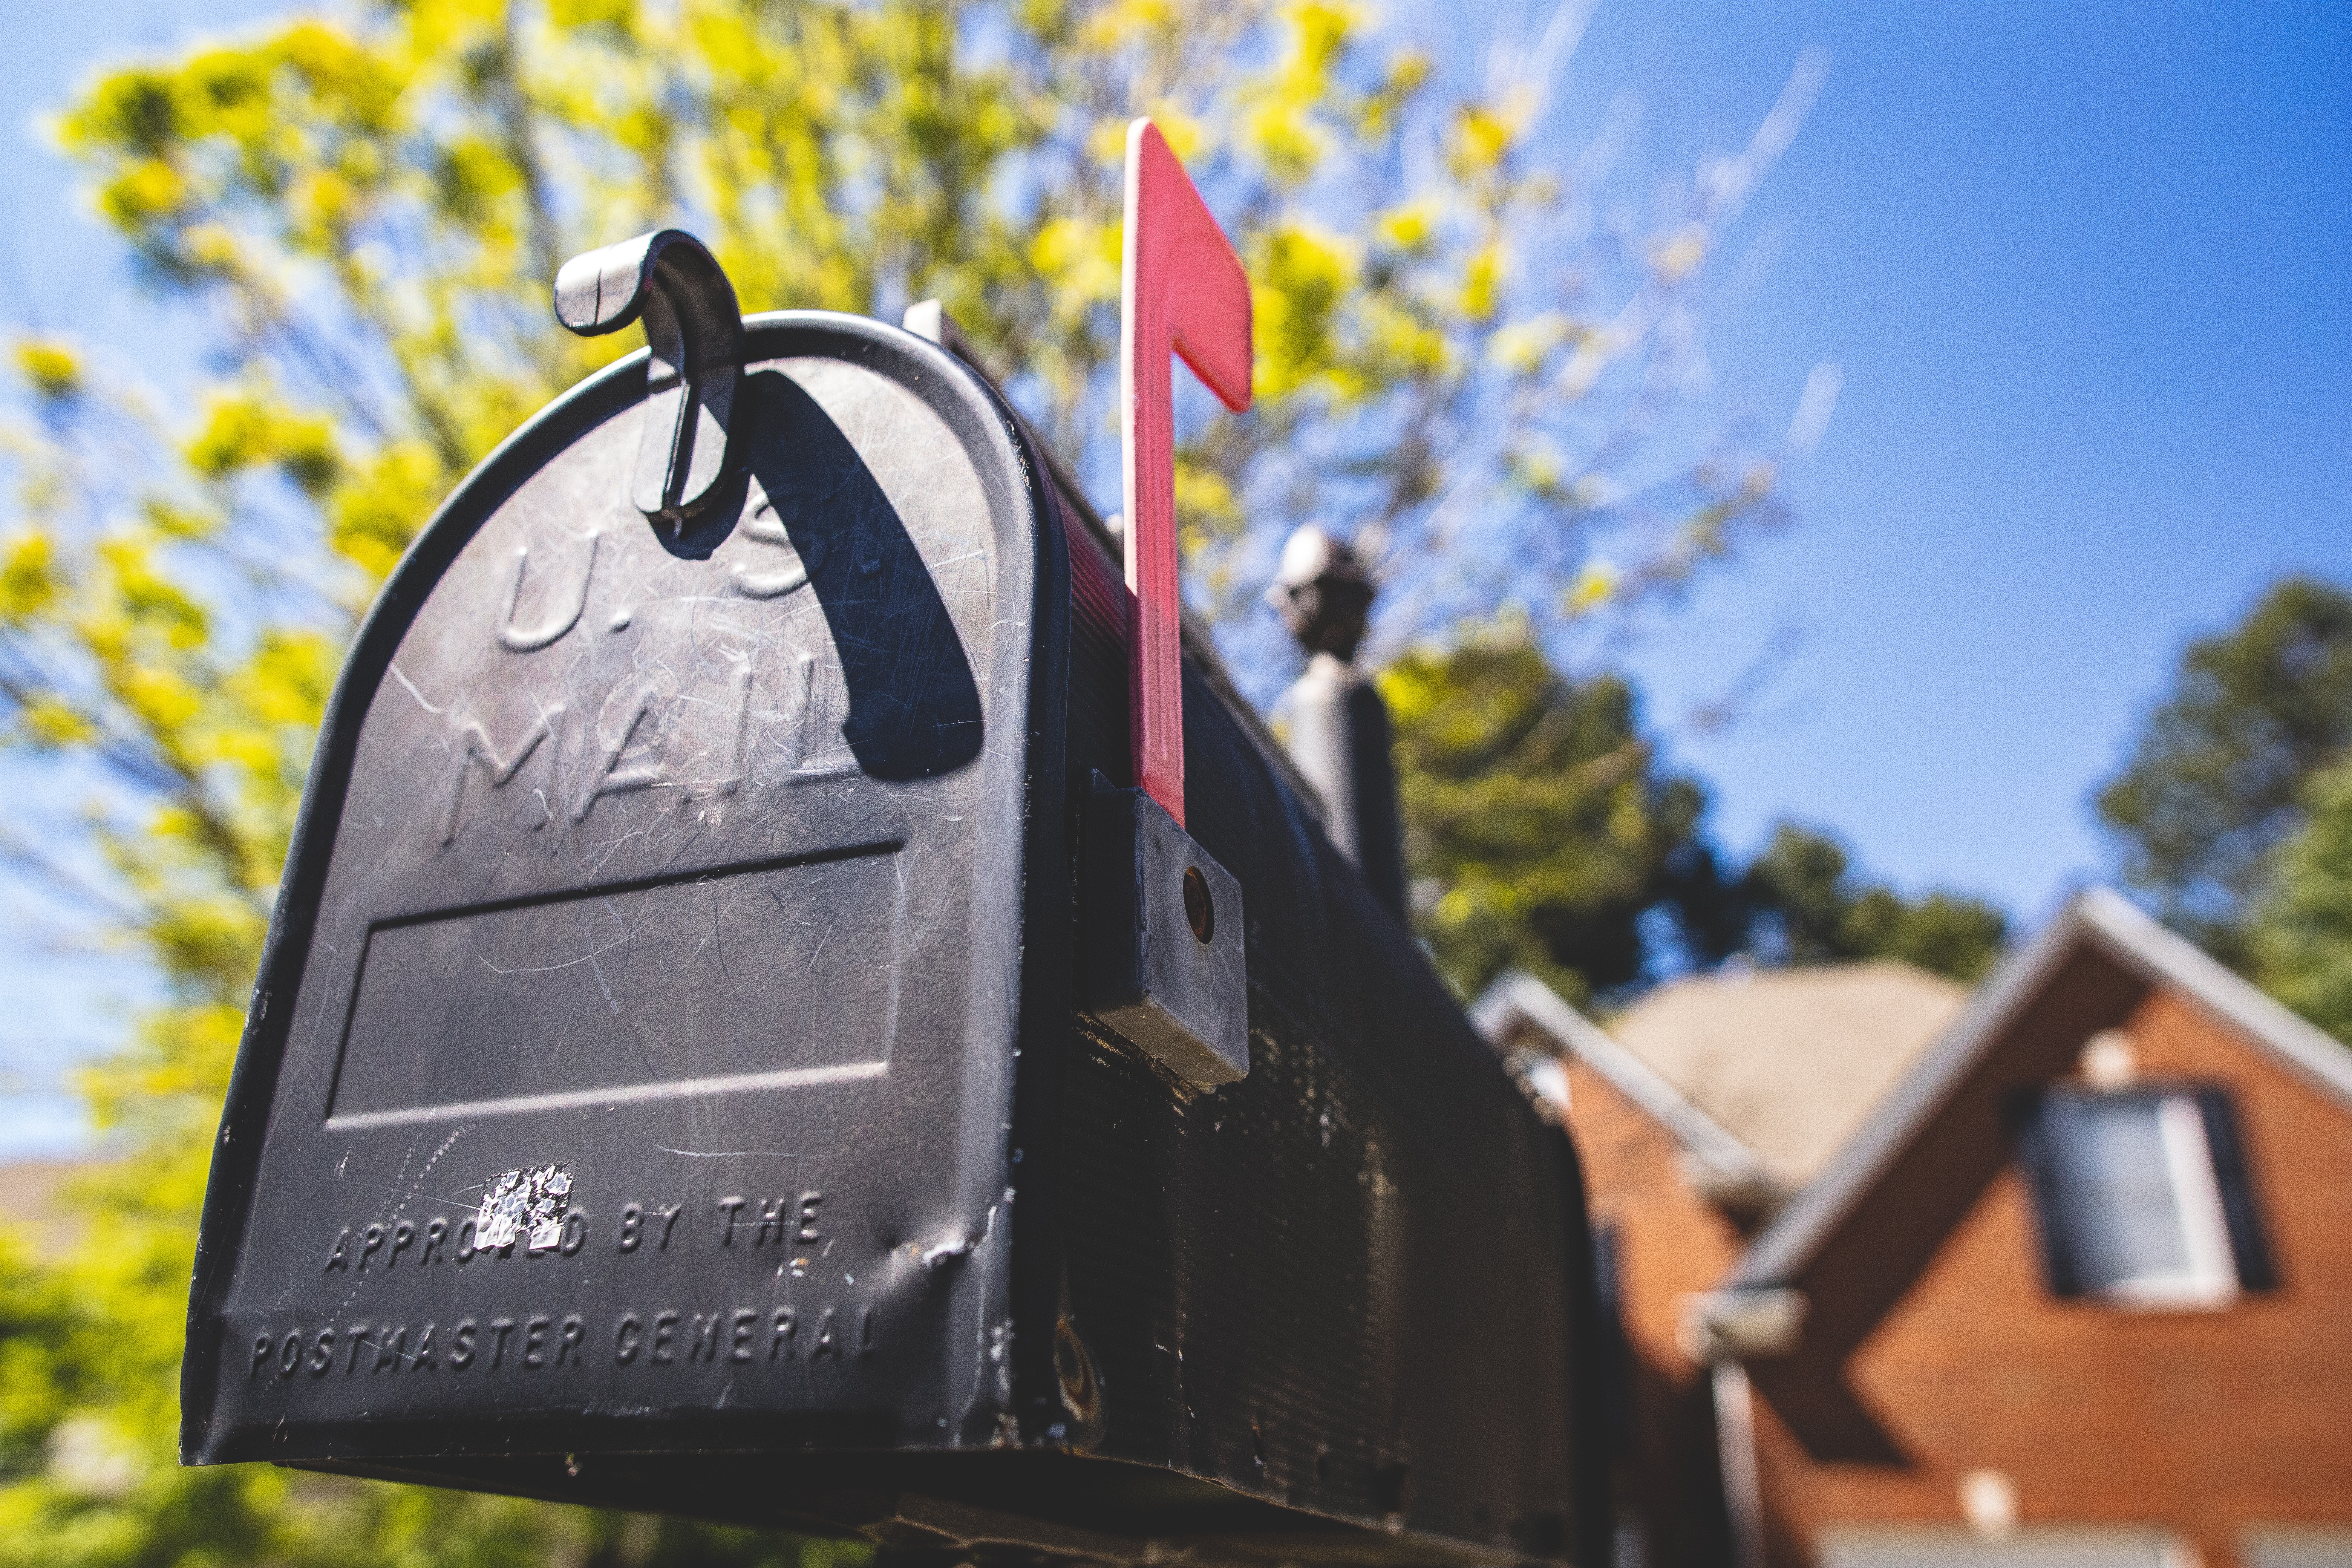 Encourage your student to change their mail forwarding address if they've moved out of Lincoln recently.